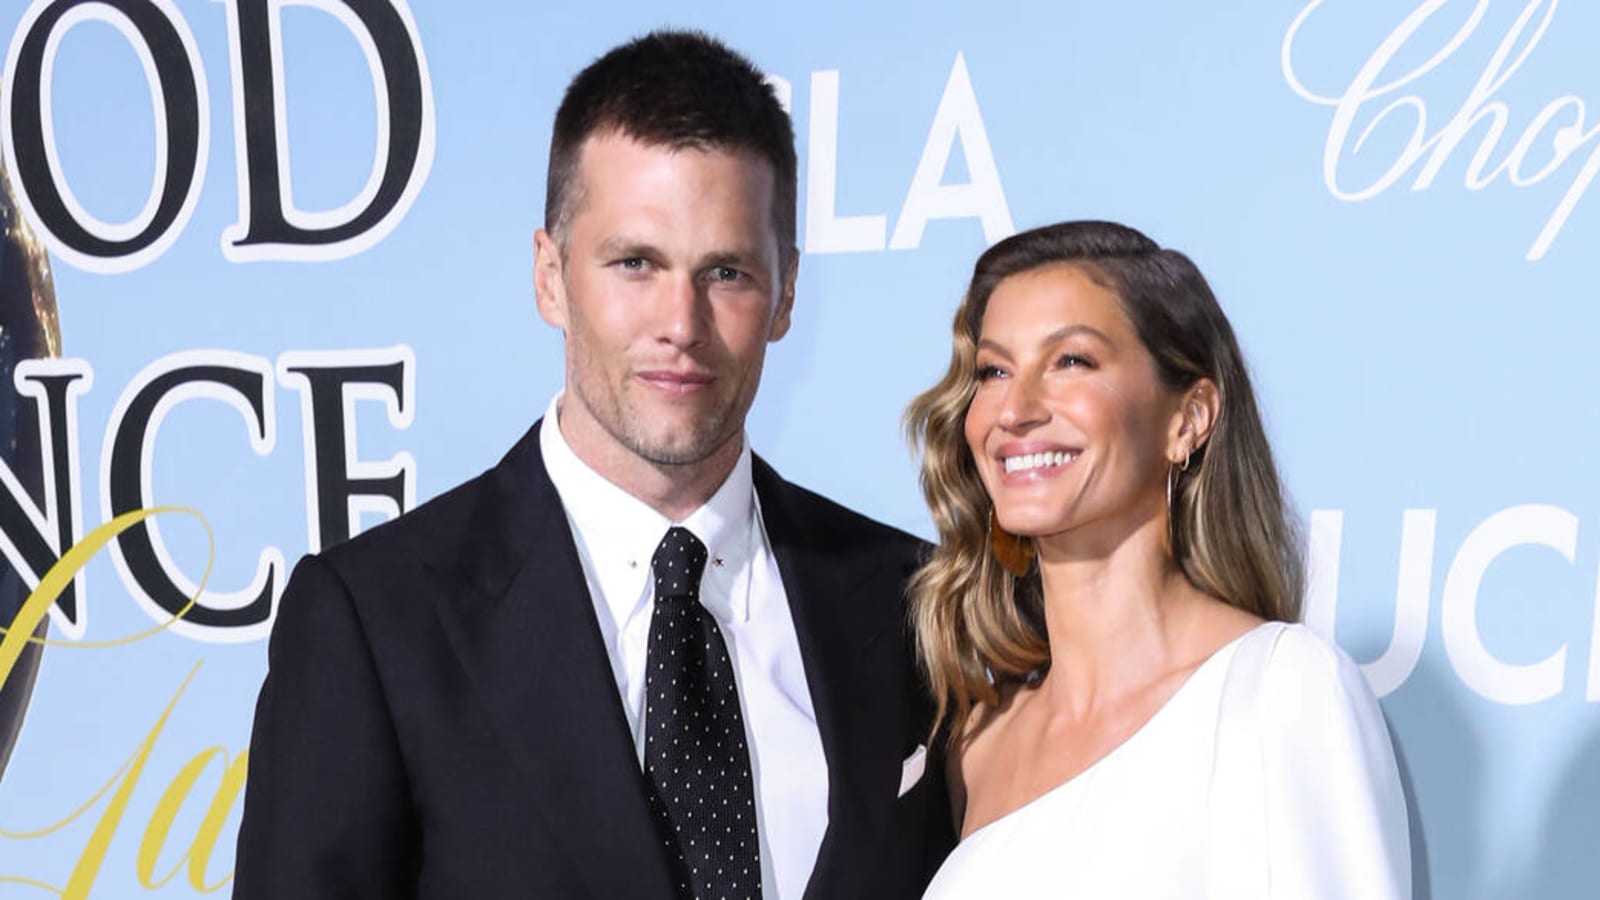 Tom Brady reportedly 'didn't want' to divorce Gisele Bundchen